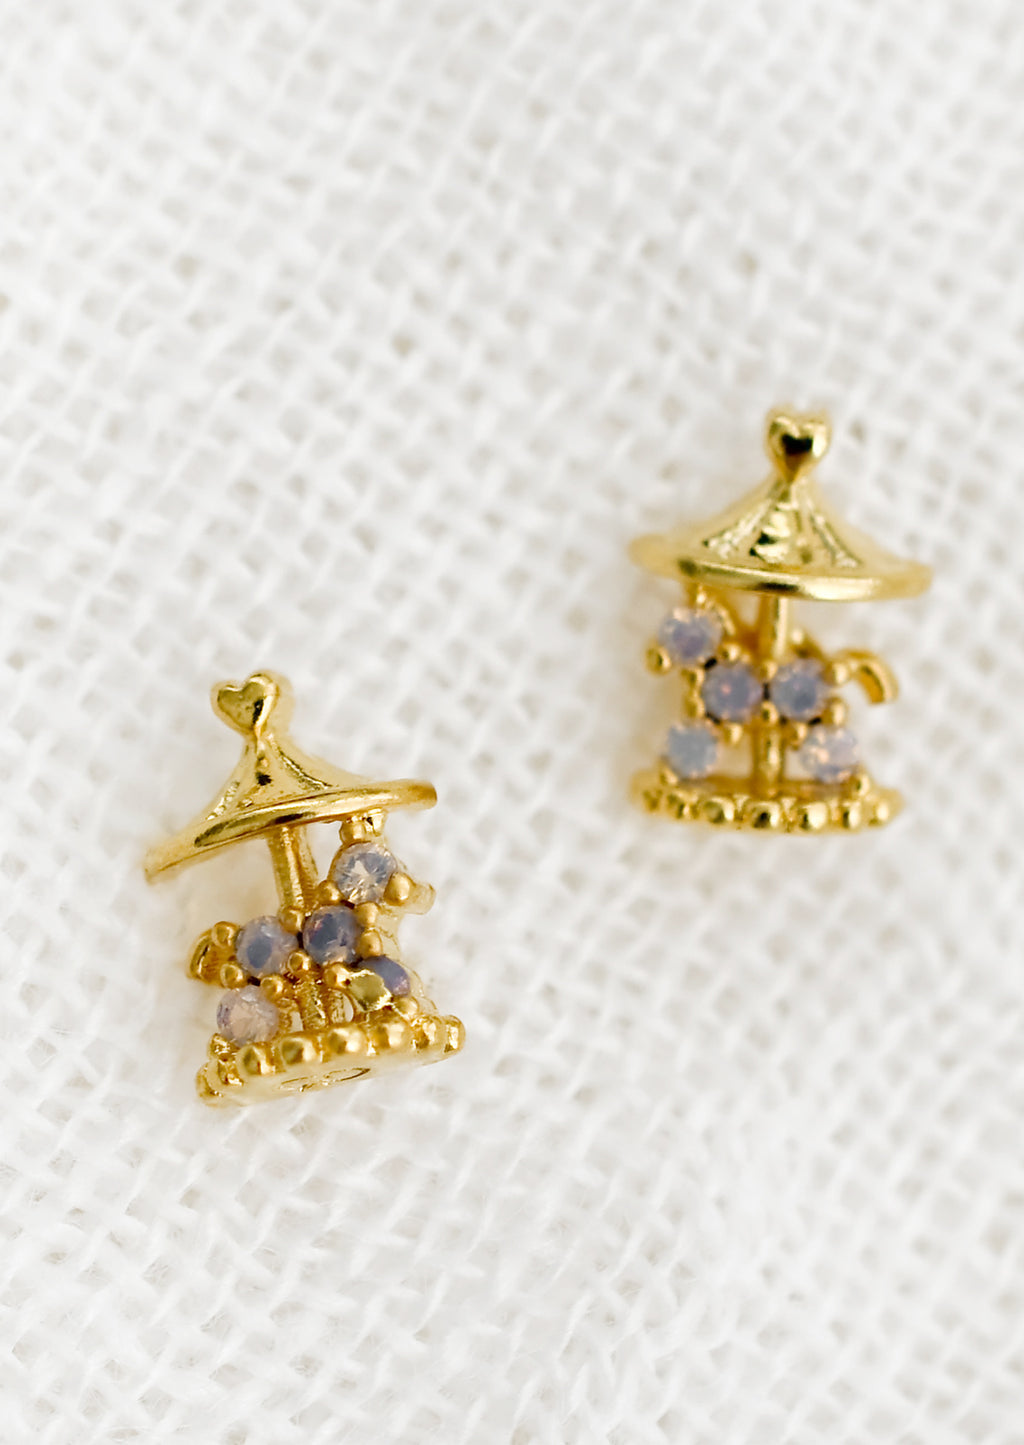 1: A pair of gold stud earrings in shape of carousel.